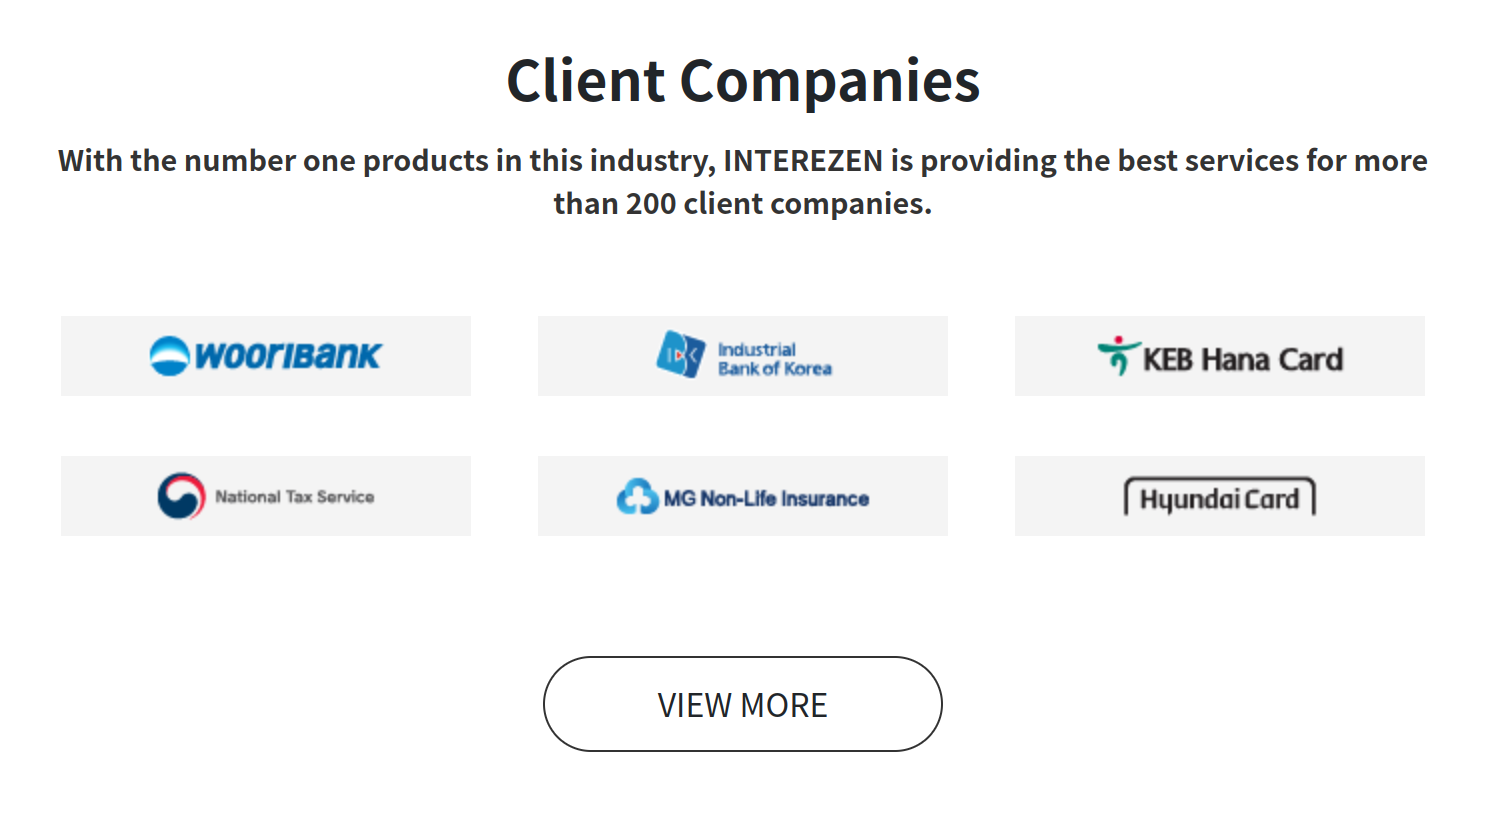 Screenshot of a website section titled: “Client Companies. With the number one products in this industry, INTEREZEN is providing the best services for more than 200 client companies.” Below it the logos of Woori Bank, Industrial Bank of Korea, KEB Hana Card, National Tax Service, MG Non-Life Insurance, Hyundai Card as well as a “View more” button.